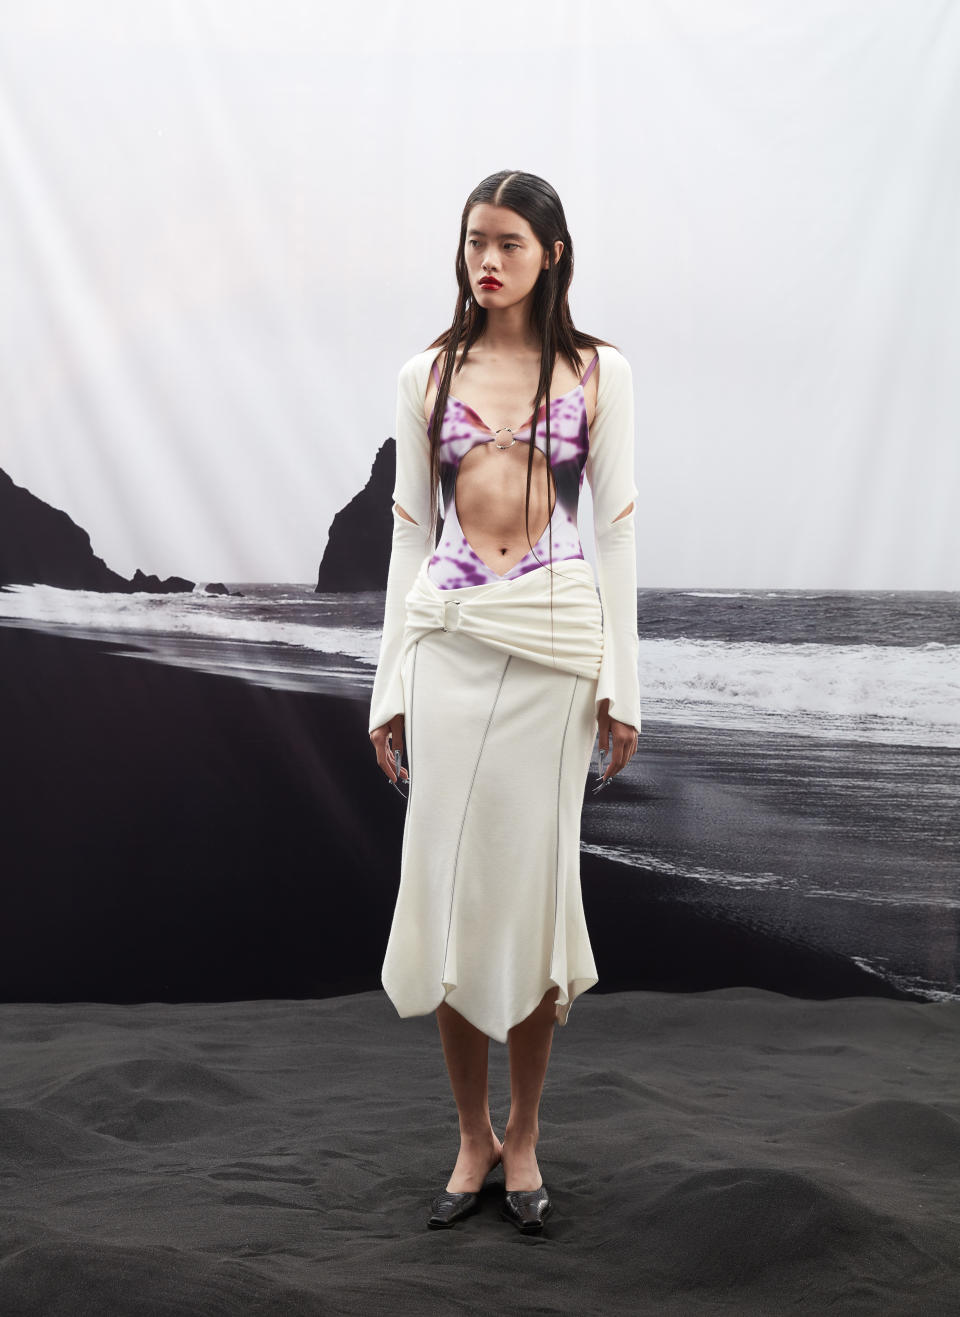 A look from Didu’s spring 2022 collection. - Credit: Zhongjia Sun/Courtesy of Didu